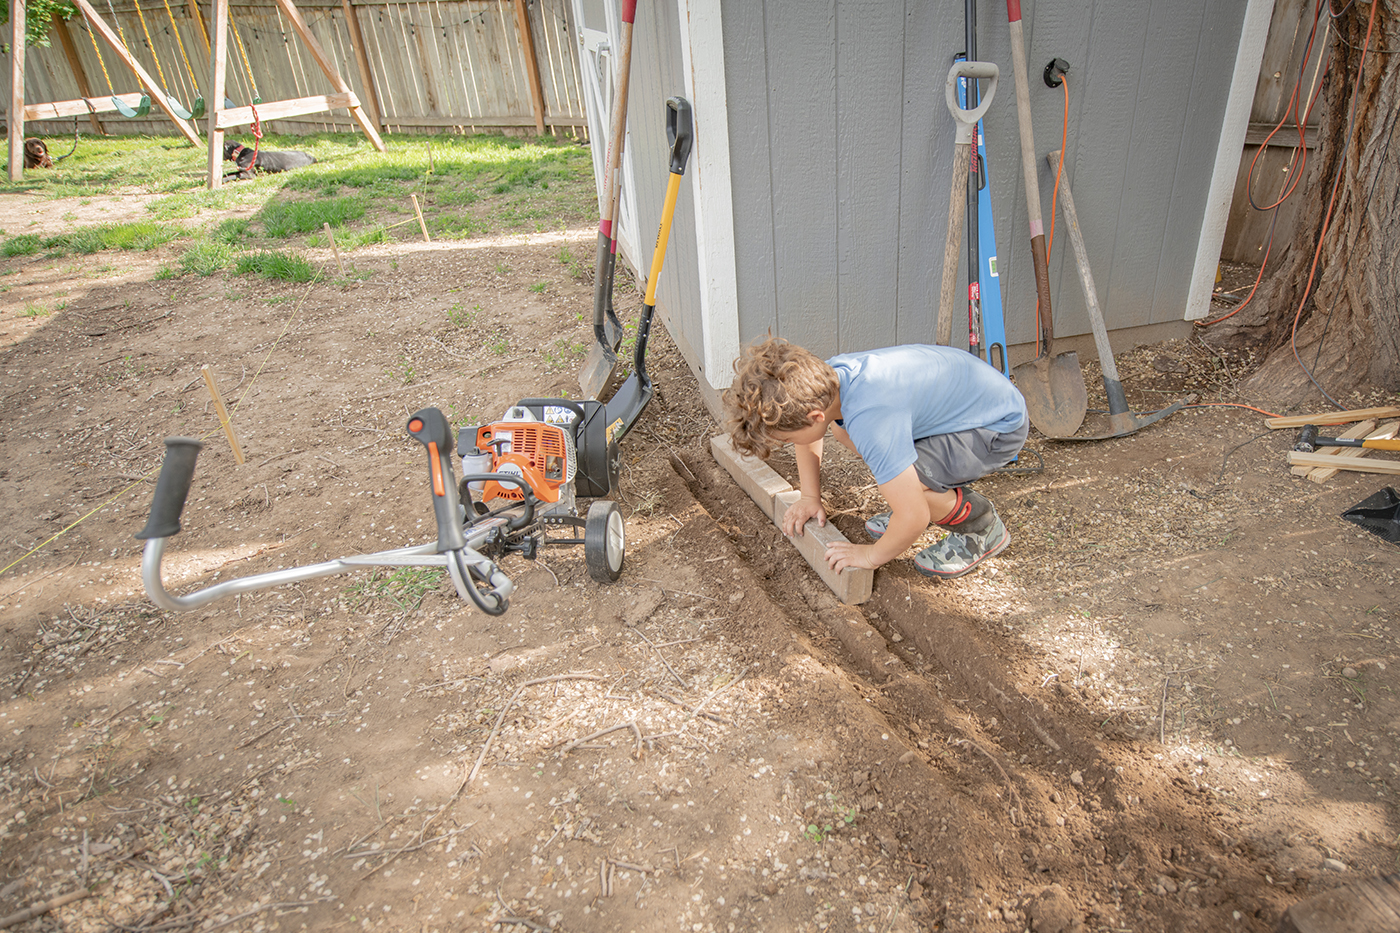 Stihl mm 56 makes placing pavers easier when remodeling backyard space